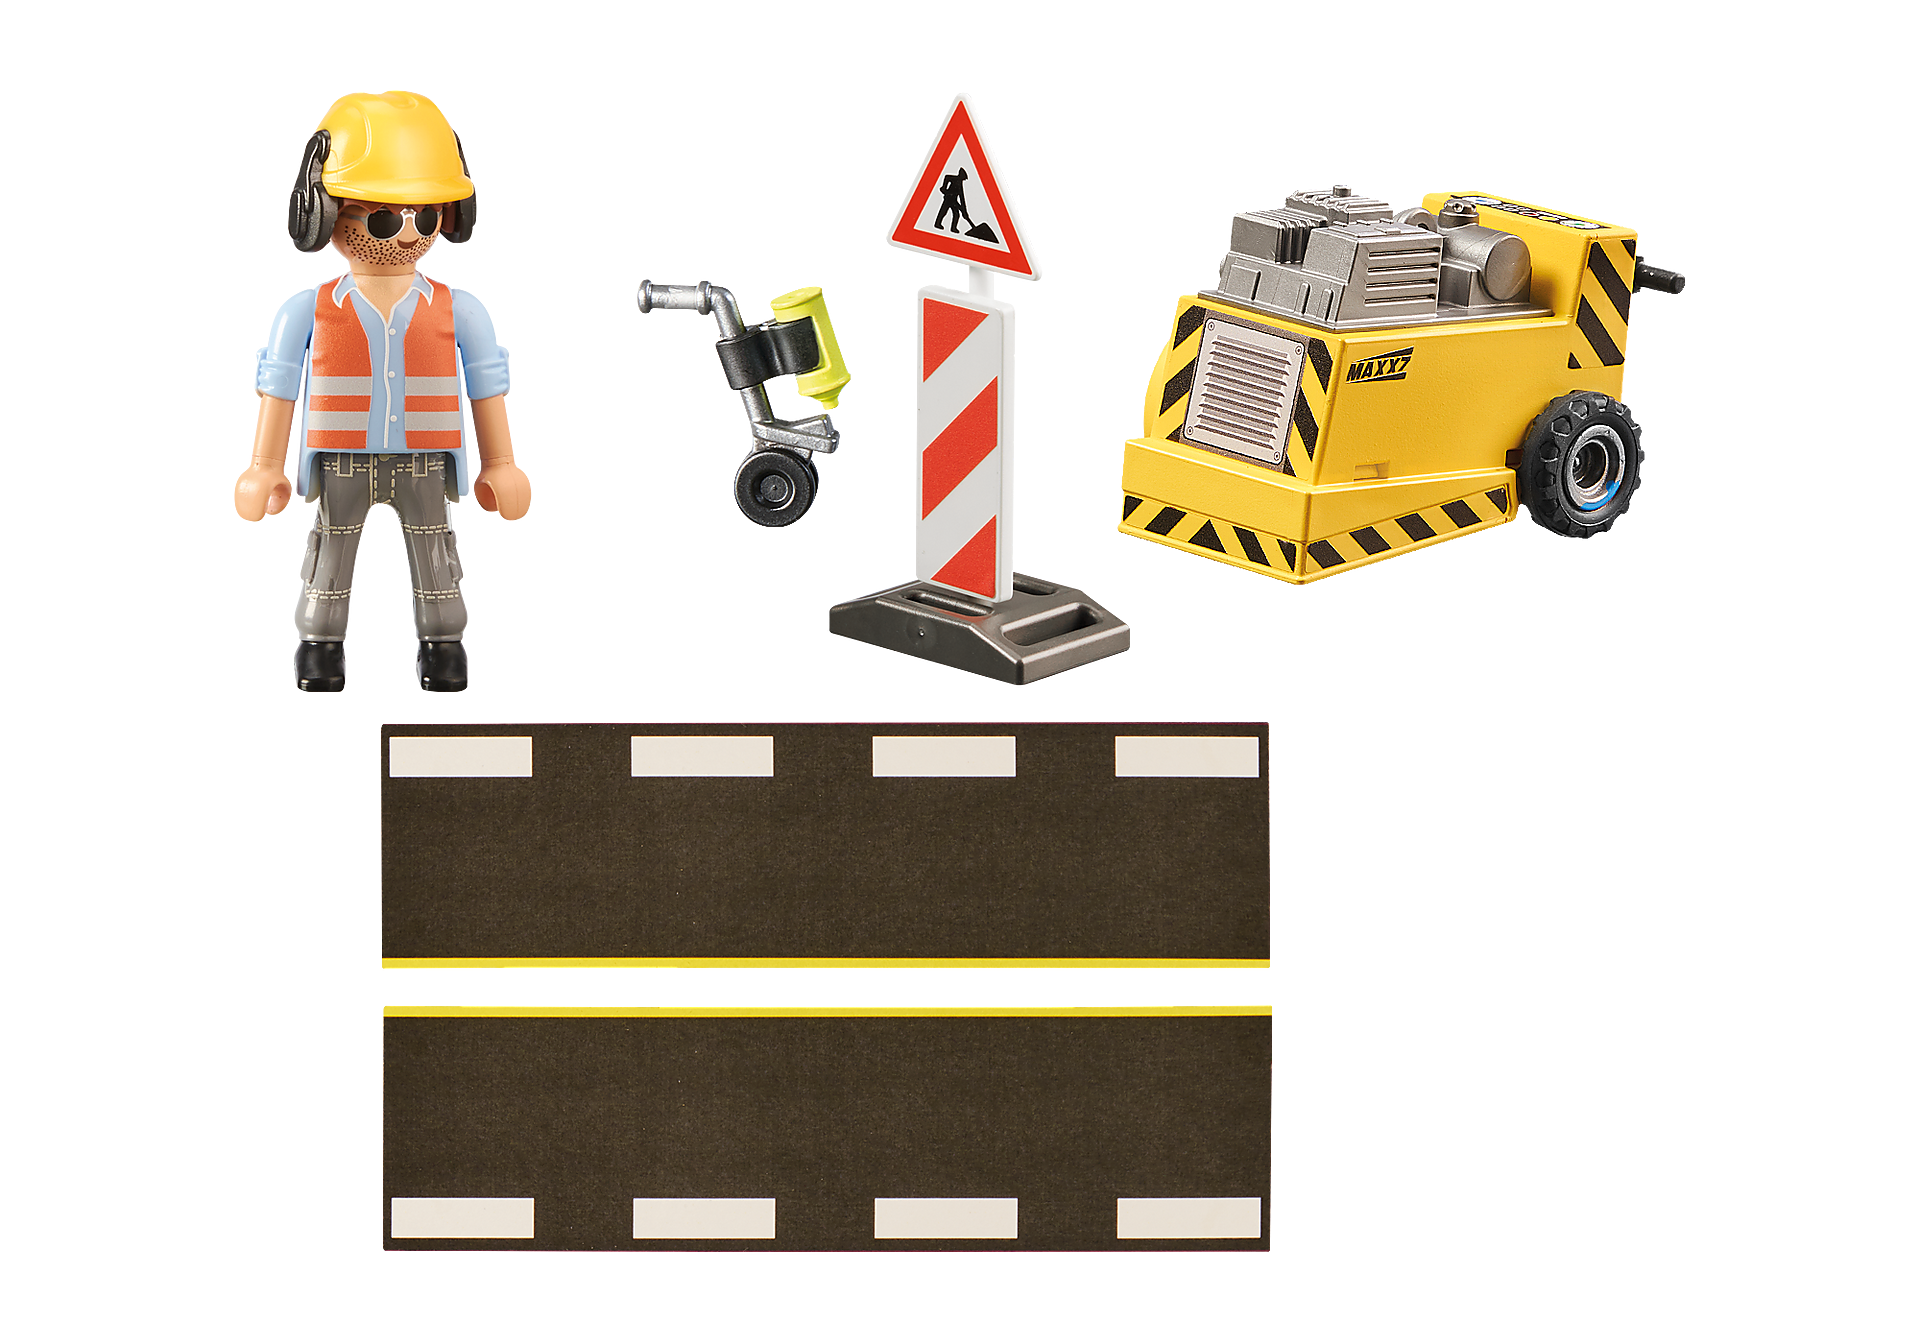 71185 Construction Worker Gift Set zoom image3